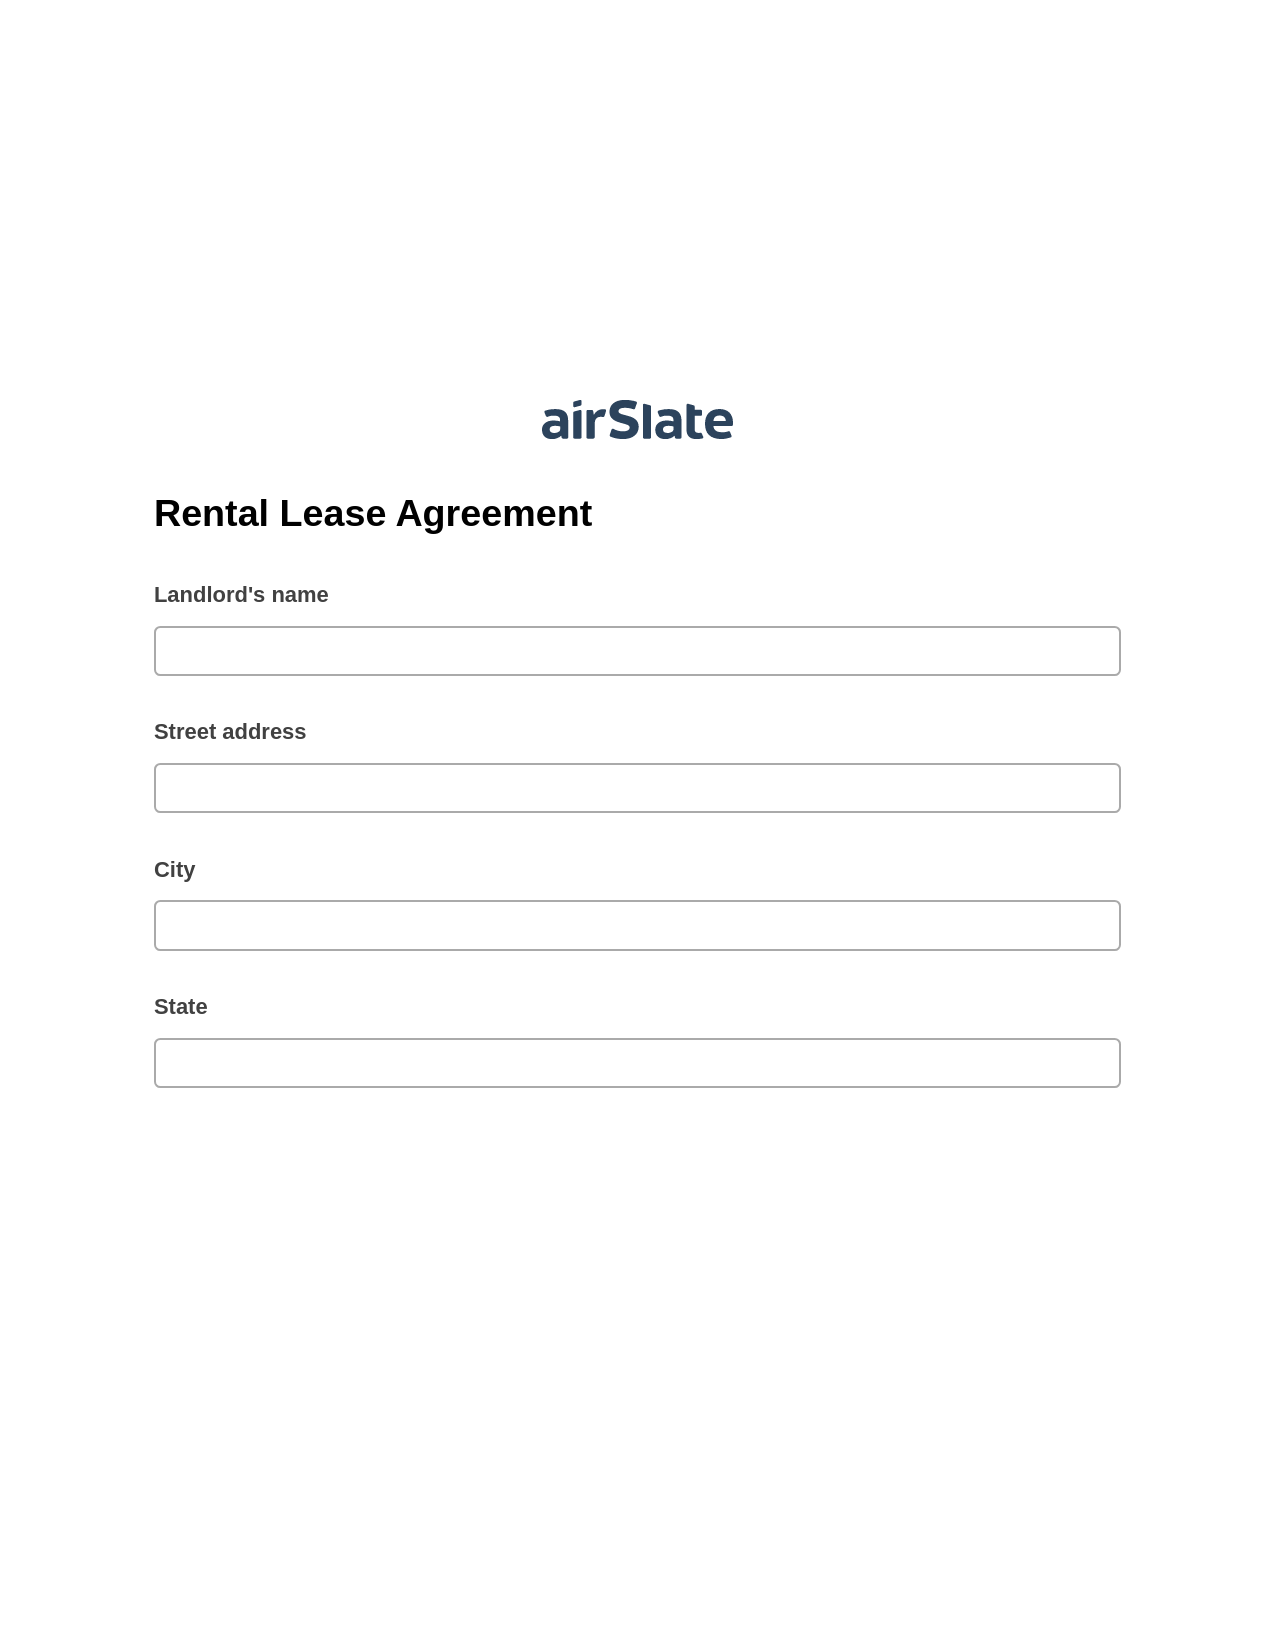 Rental Lease Agreement Pre-fill from Google Sheet Dropdown Options Bot, Update NetSuite Records Bot, Dropbox Bot